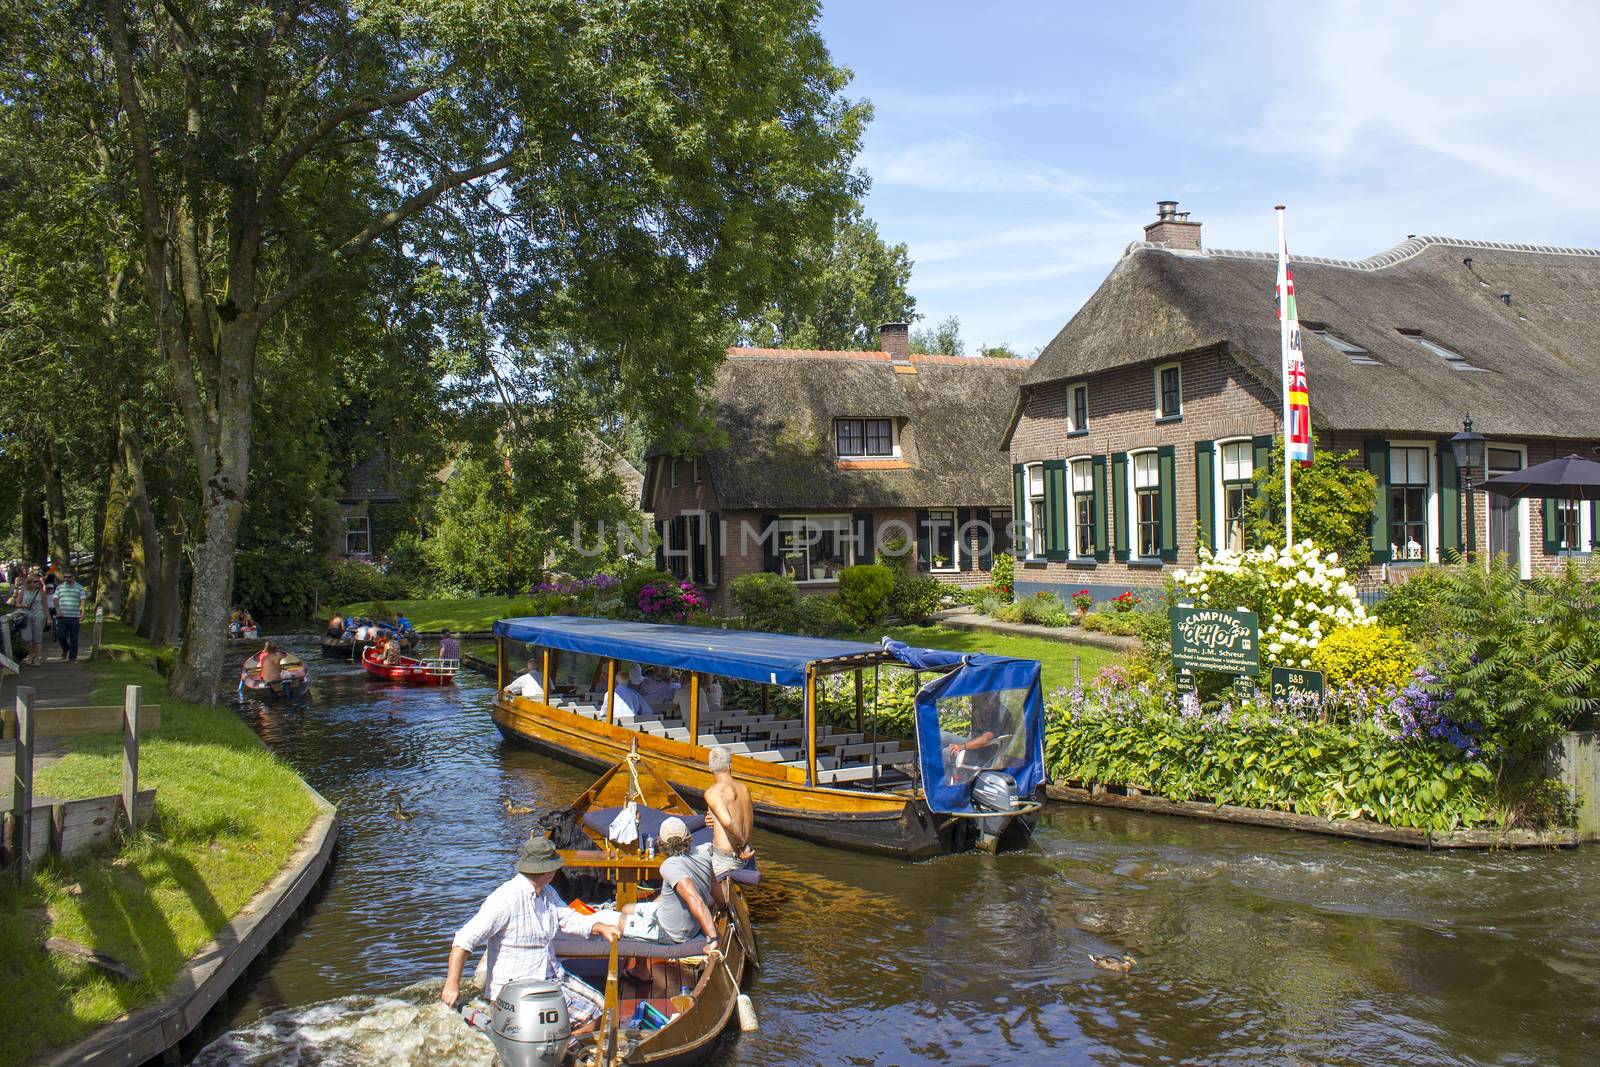 GIETHOORN, NETHERLANDS - AUGUST 05, 2015: Unknown visitors in the sightseeing boating trip in a canal in Giethoorn. The beautiful houses and gardening city is know as "Venice of the North". 